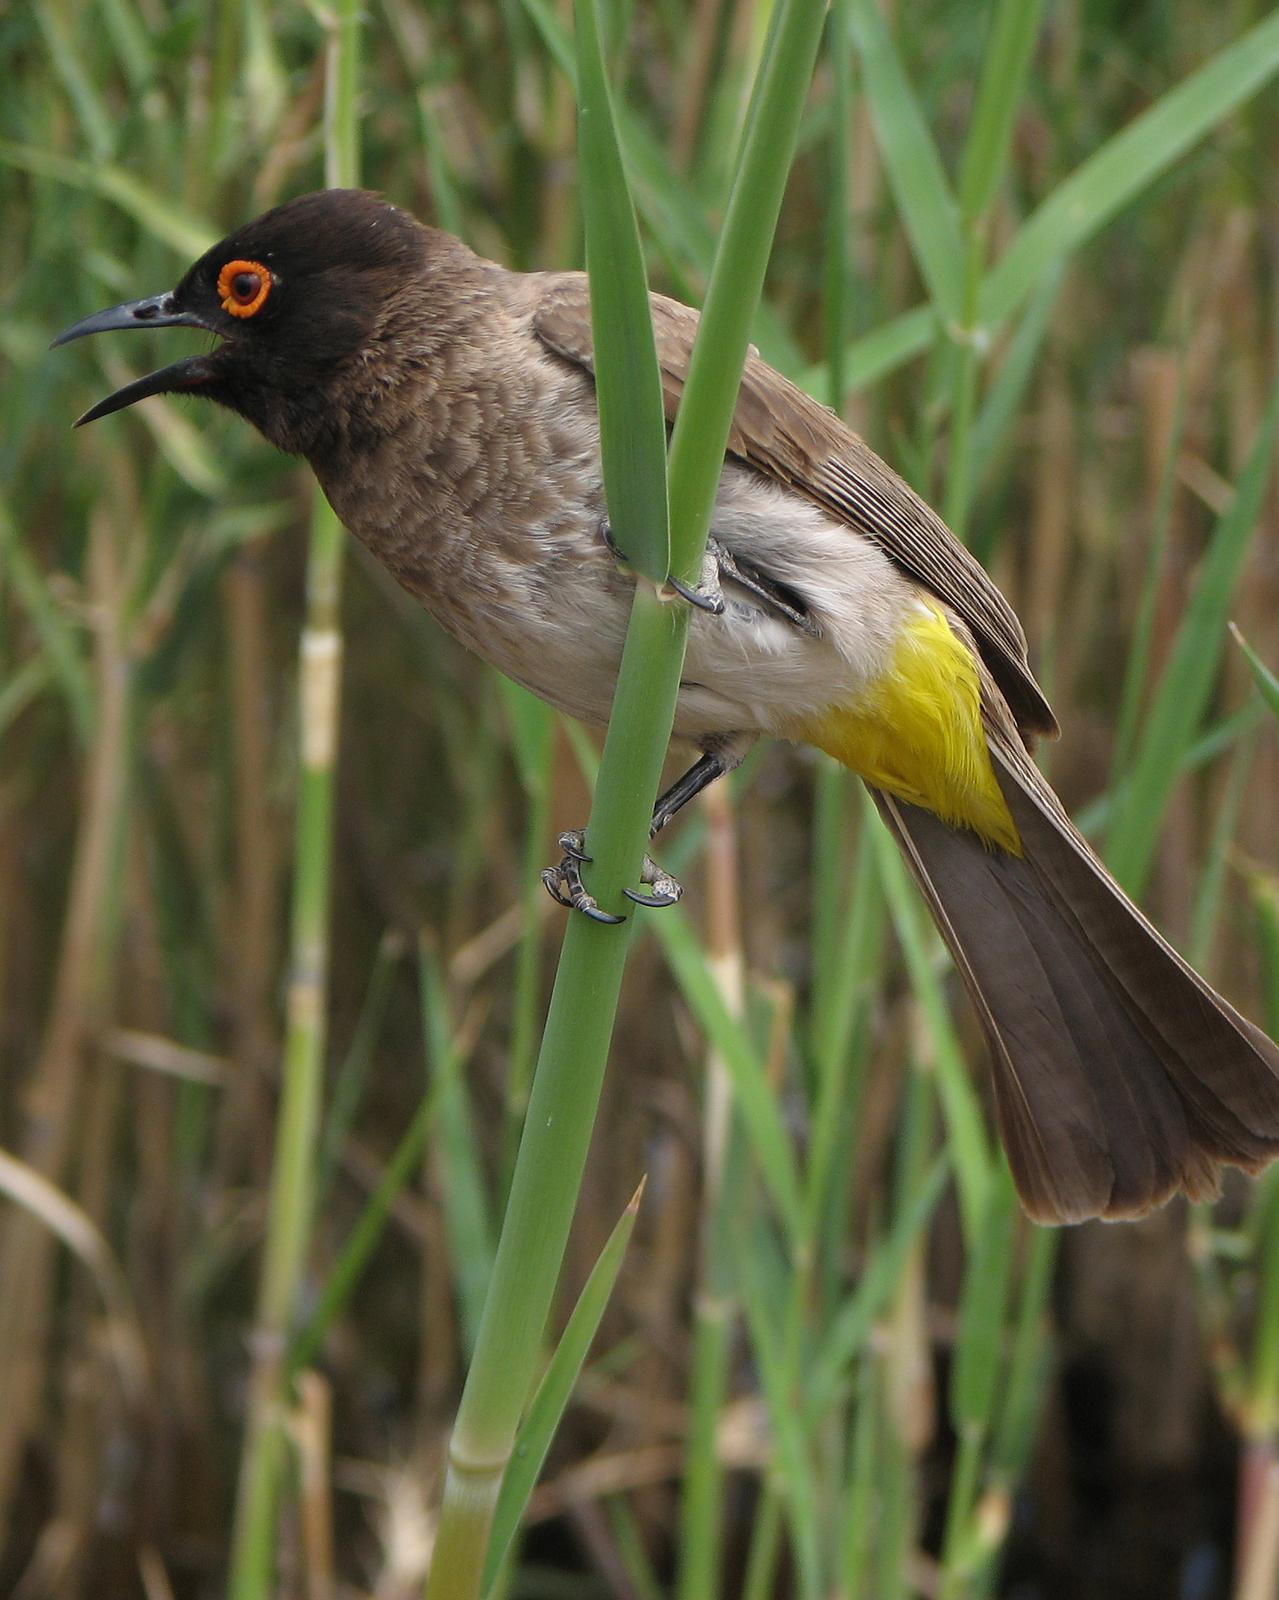 Black-fronted Bulbul Photo by Henk Baptist